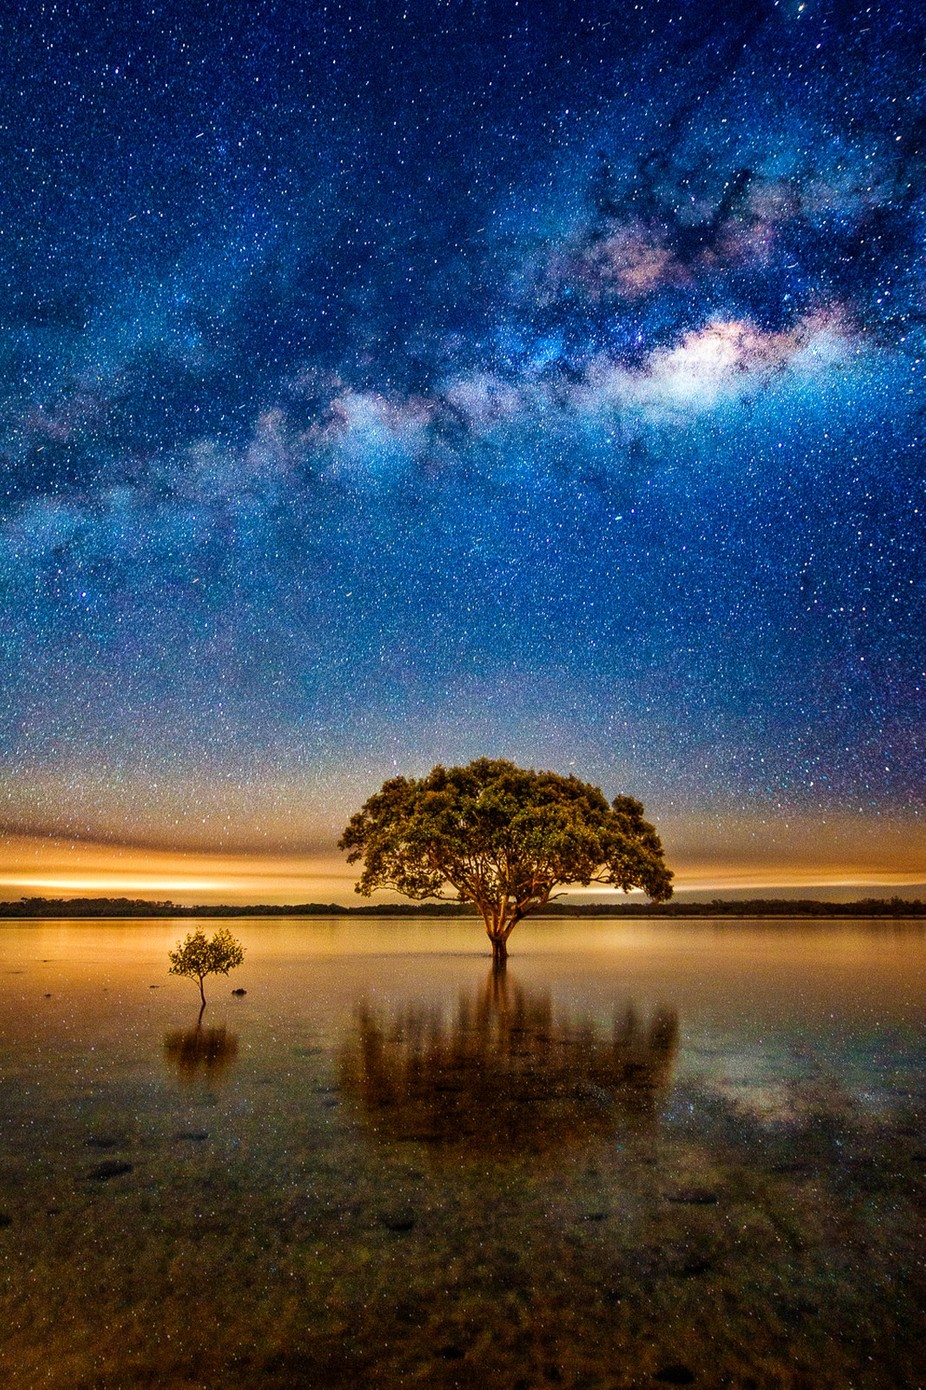 Lone Night by paulmp - My Best Shot Photo Contest Vol 3